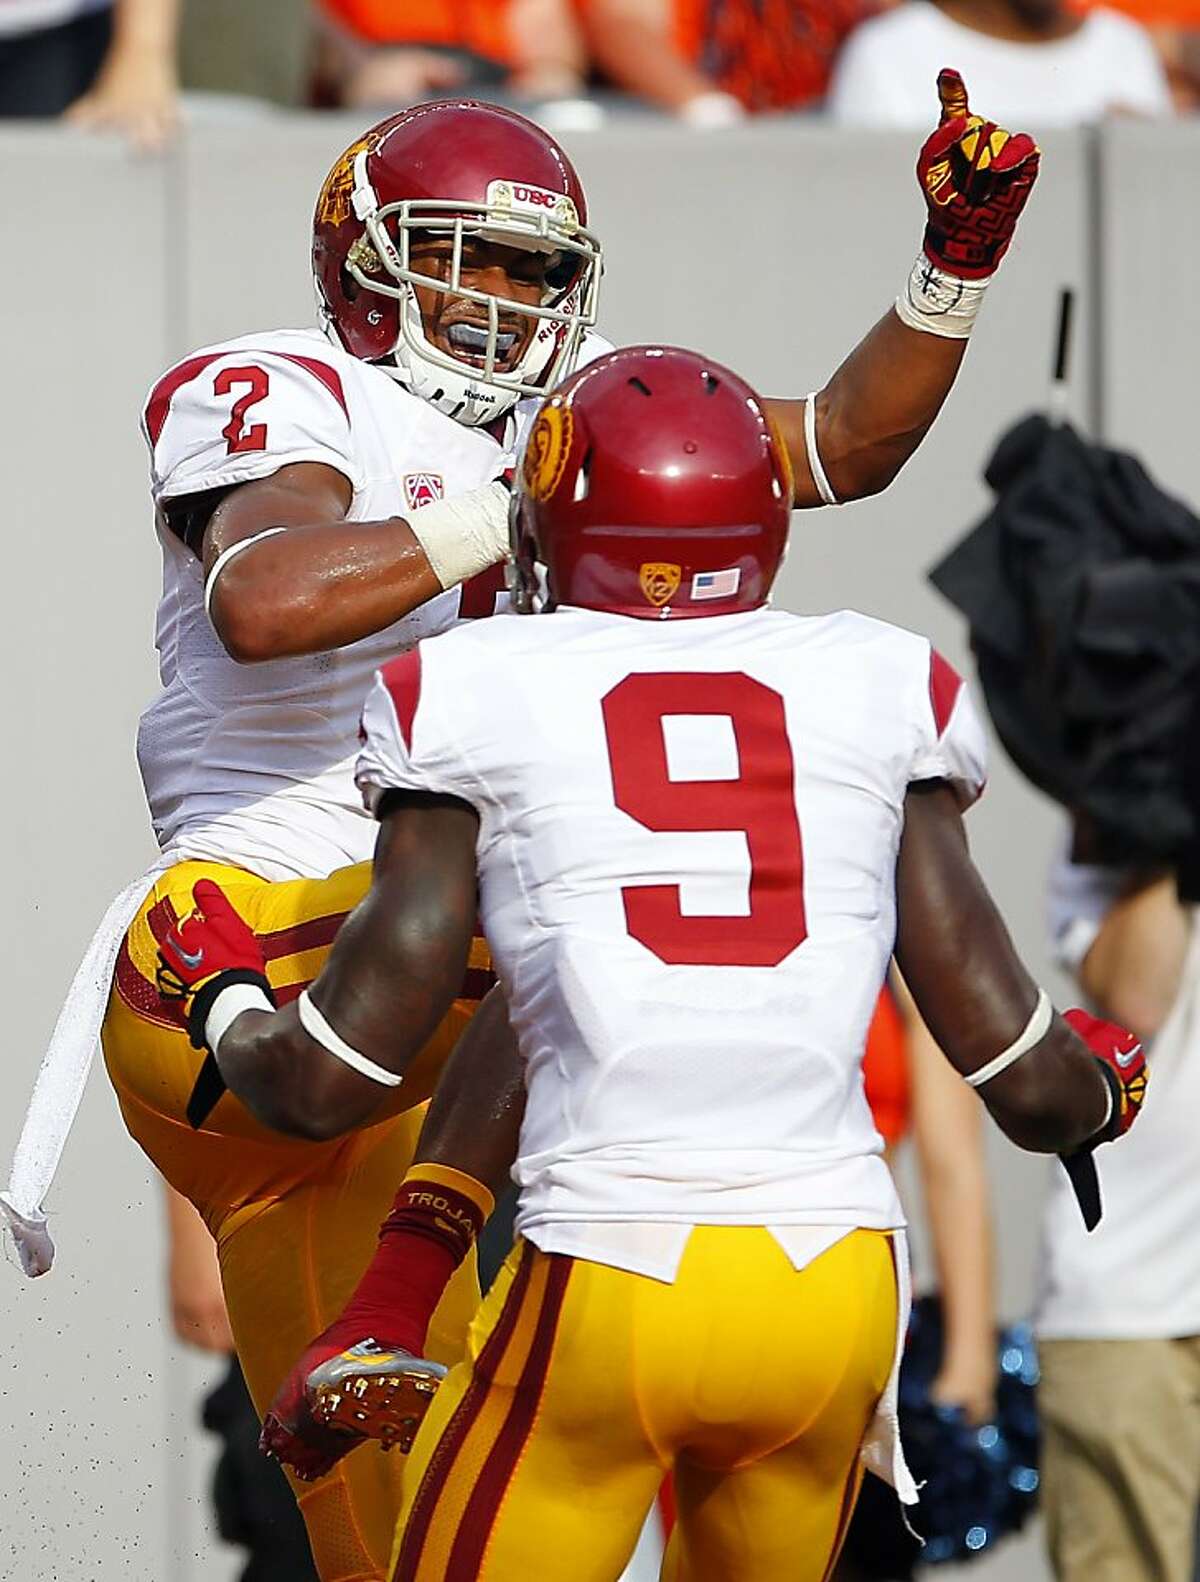 EAST RUTHERFORD, NJ - SEPTEMBER 8: Robert Woods #2 of the USC Trojans celebrates his touchdown catch with teammate Marqise Lee #9 against the Syracuse Orange in the first half during a game at MetLife Stadium on September 8, 2012 in East Rutherford, New Jersey. (Photo by Rich Schultz /Getty Images)